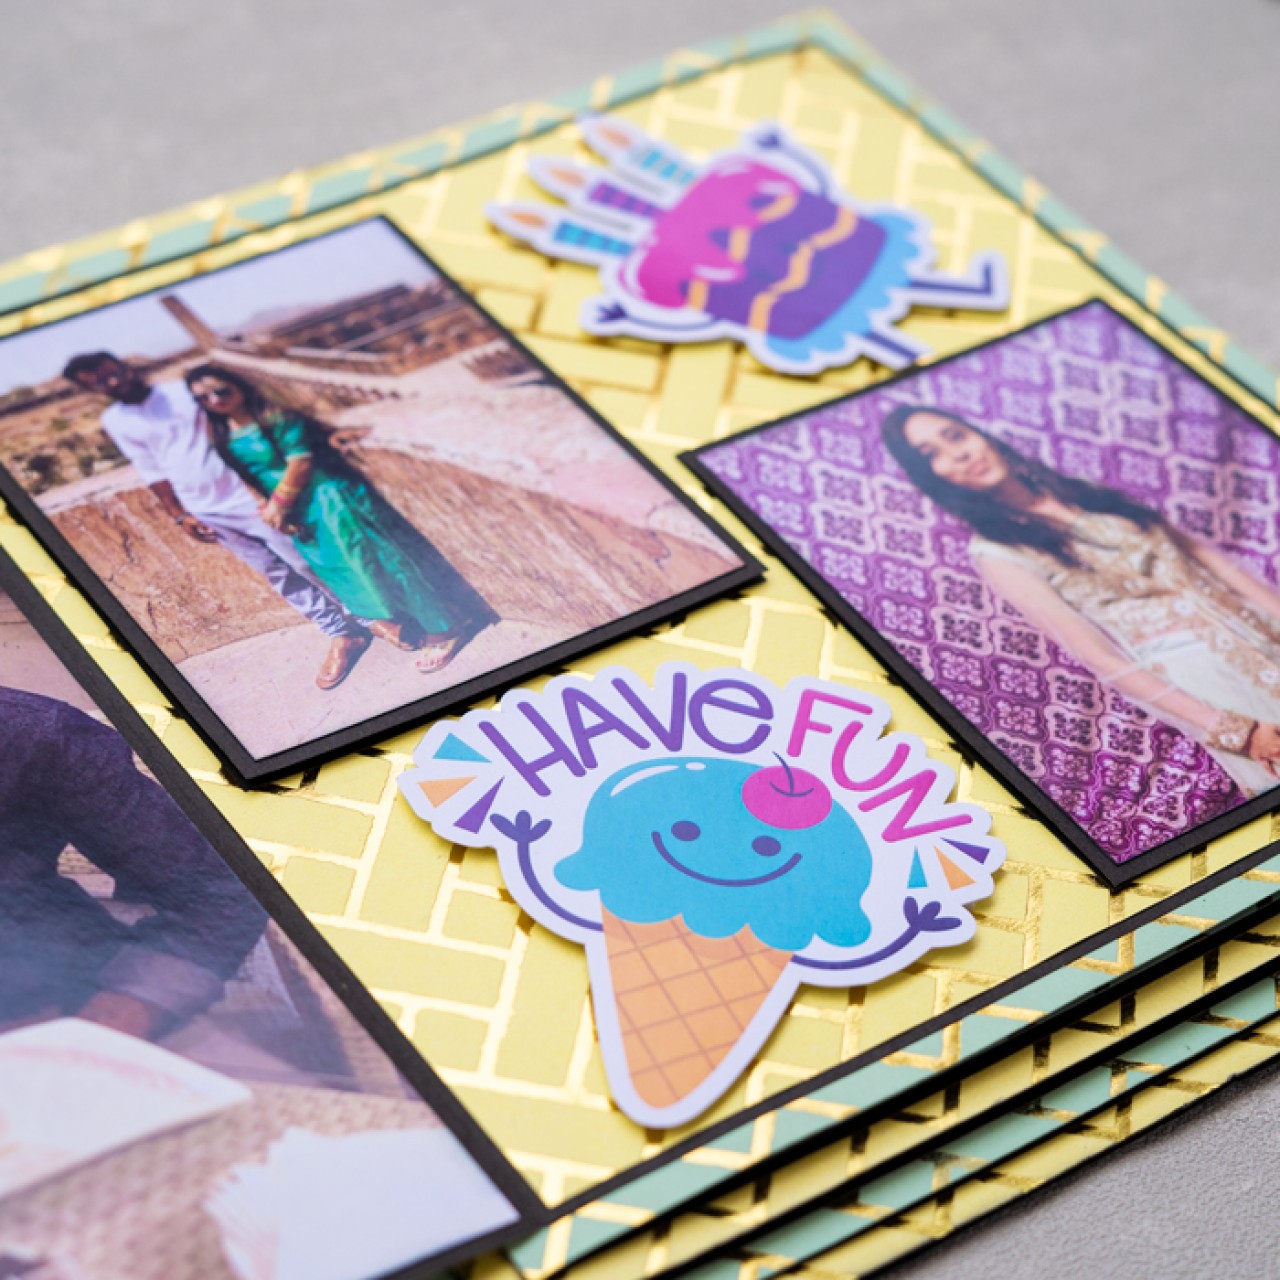 Personalized Handcrafted Pyramid Photo Album